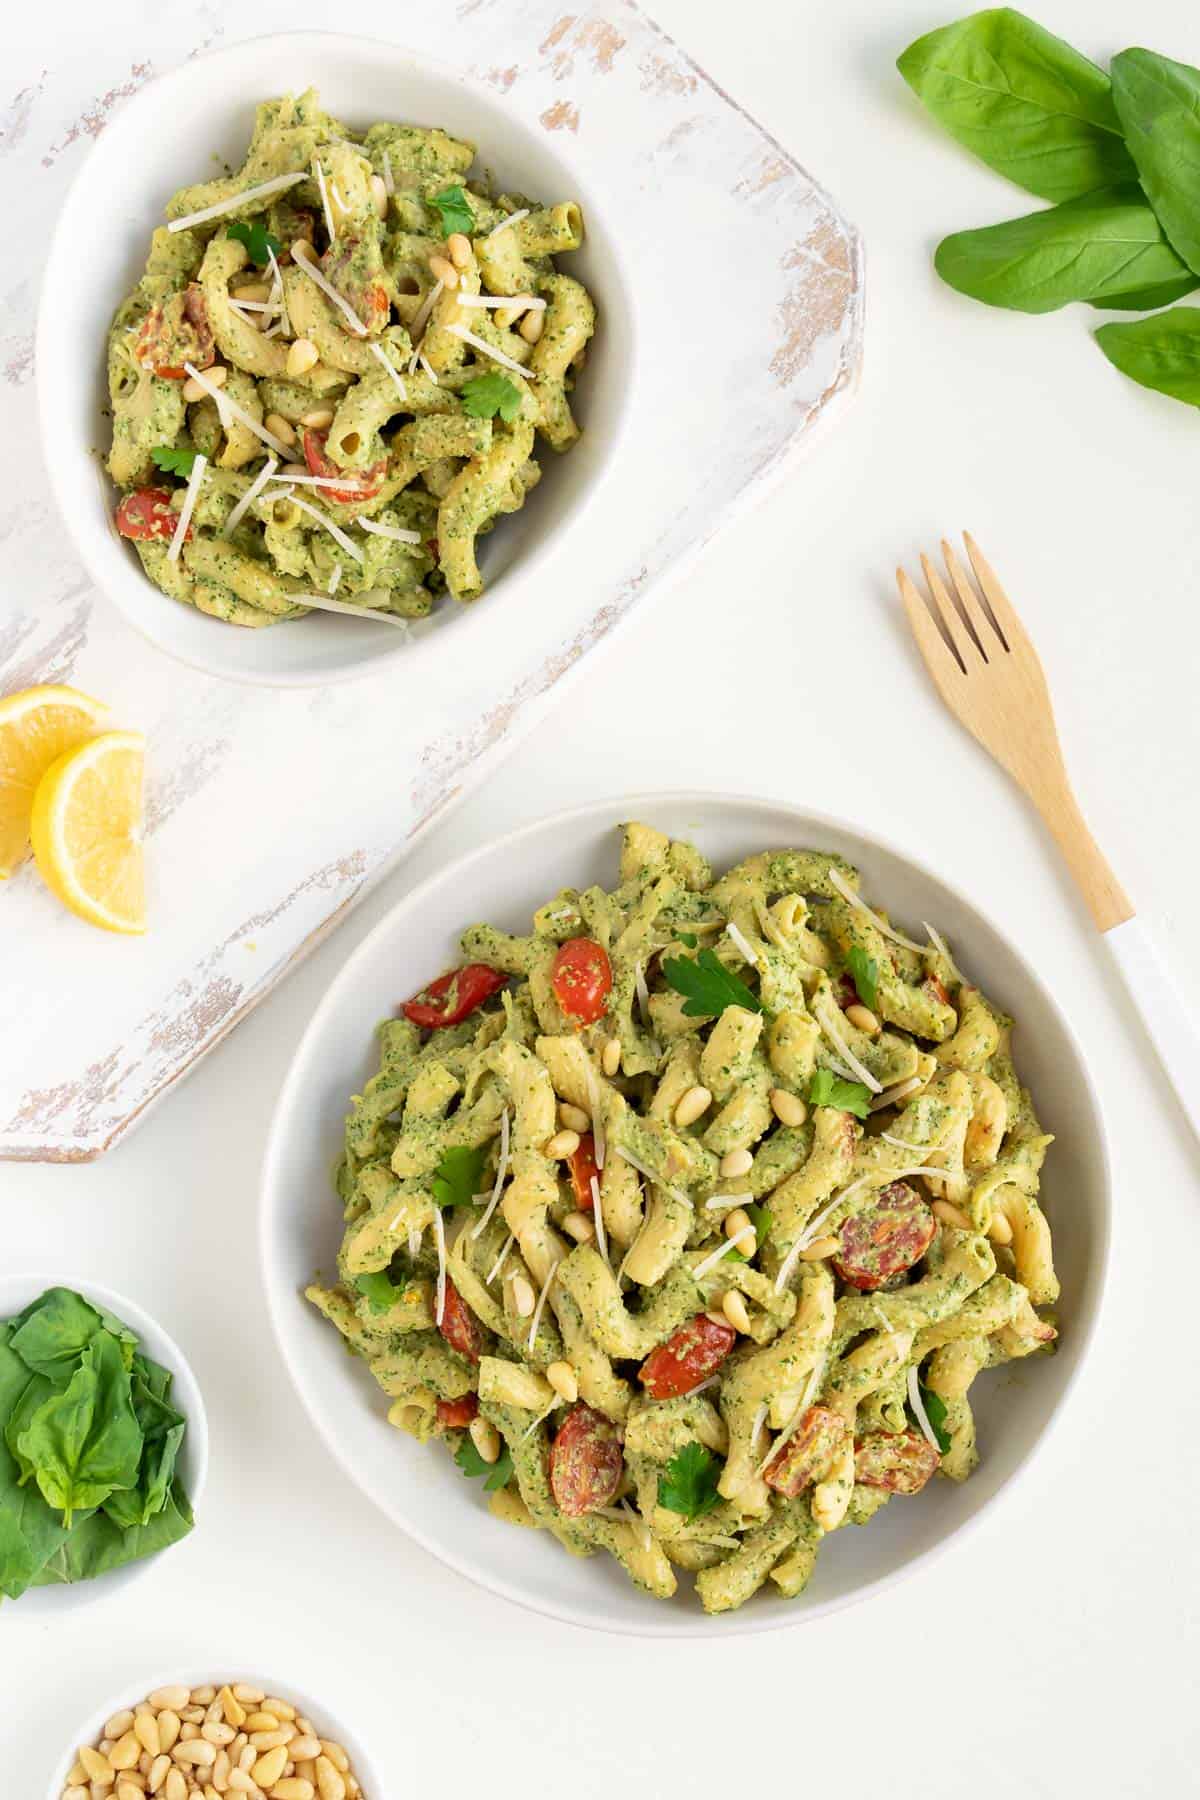 two white bowls filled with vegan pesto cavatappi pasta alongside a small bowl of basil leaves, lemons, a wooden fork, and pine nuts